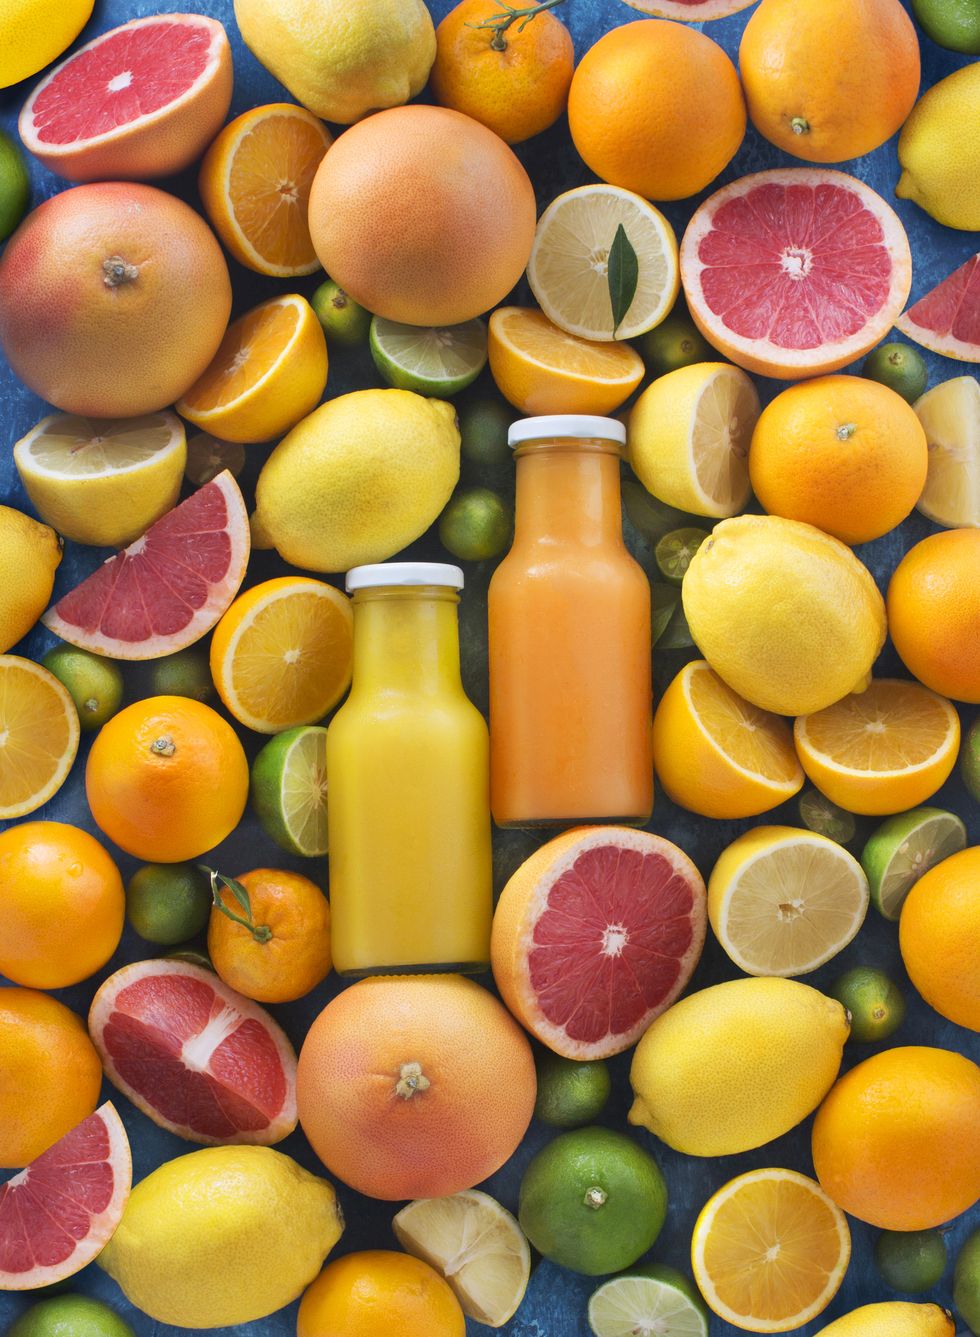 assorted citrus fruits and juice in bottles